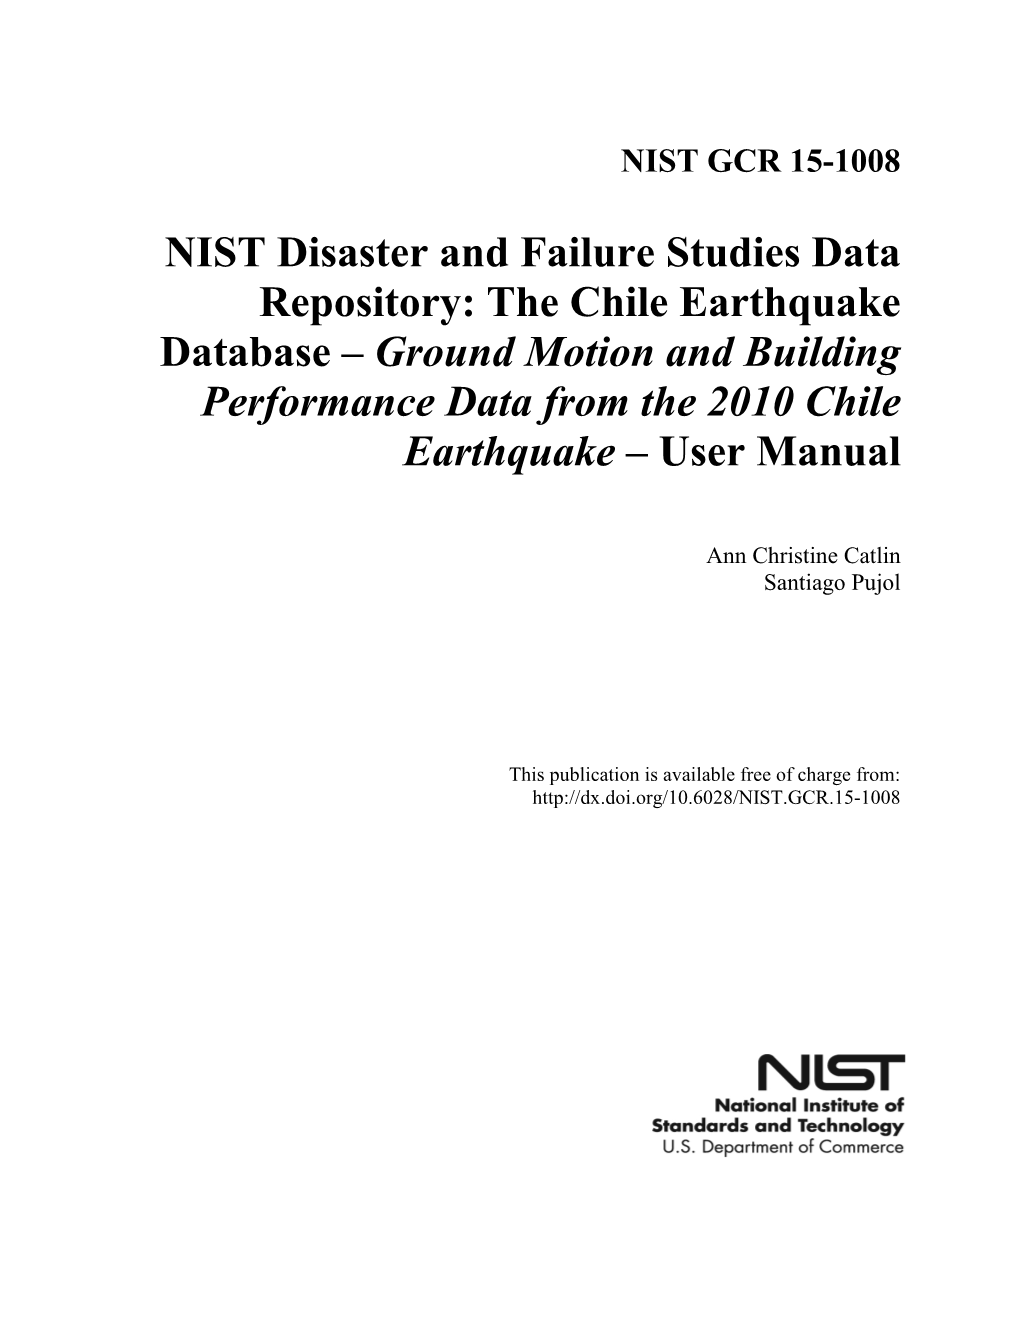 The Chile Earthquake Database – Ground Motion and Building Performance Data from the 2010 Chile Earthquake – User Manual